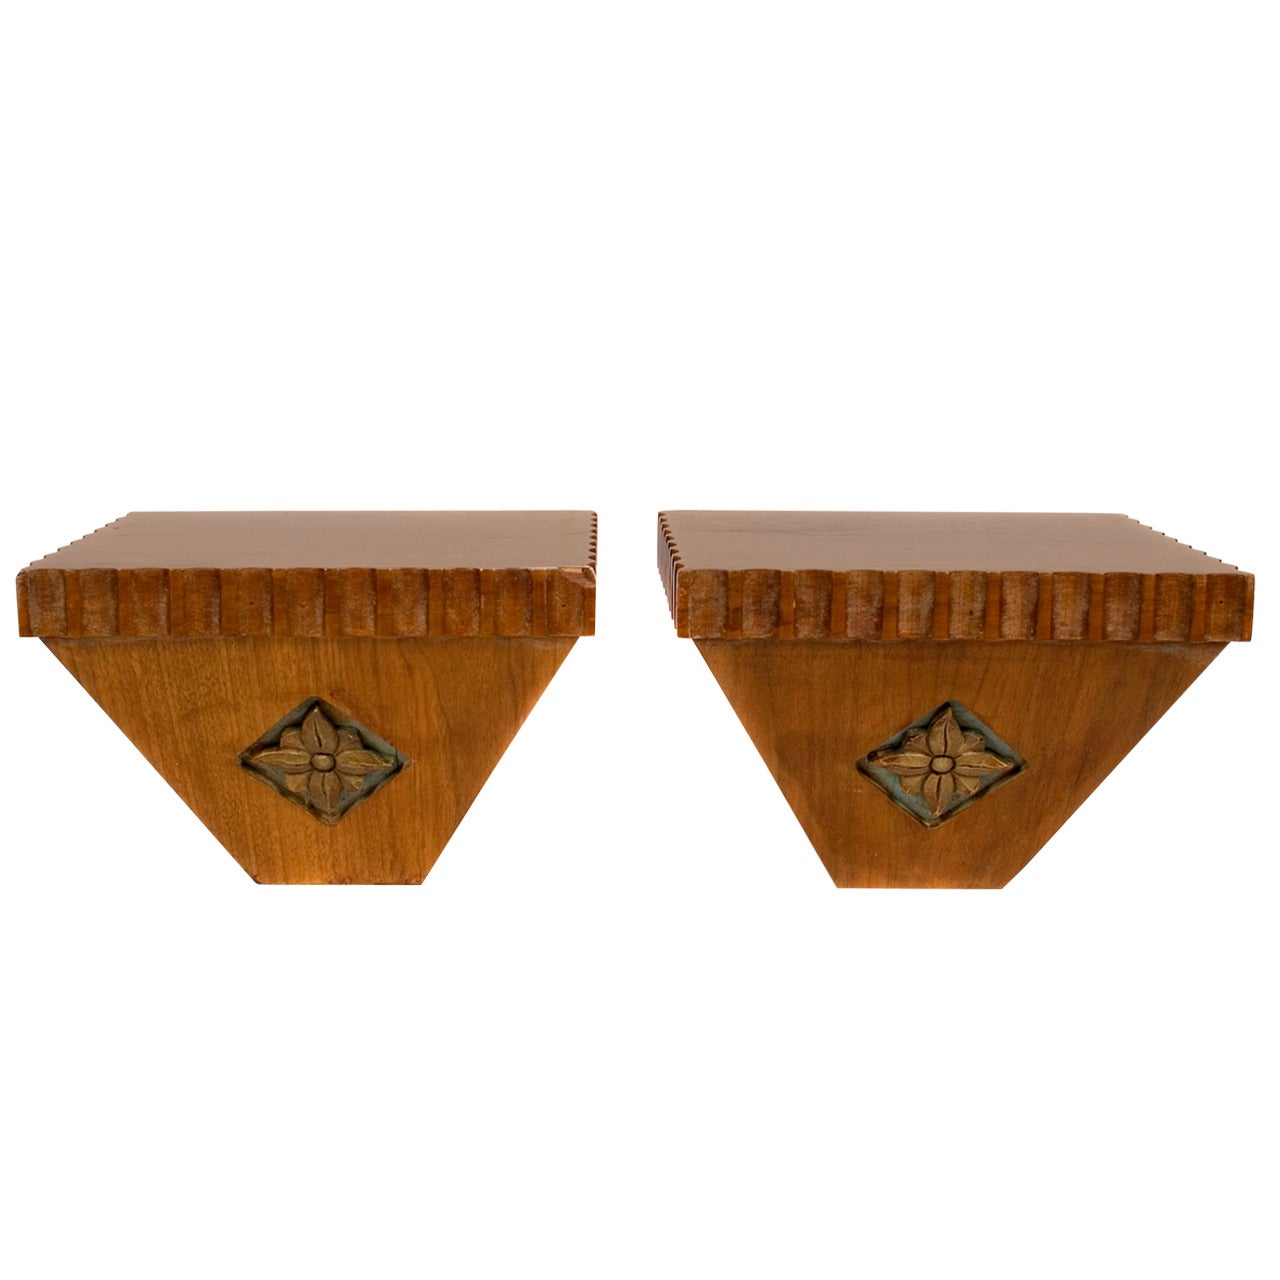 Pair of French Mahogany Wooden Shelves with Carved Decoration, circa 1930s For Sale